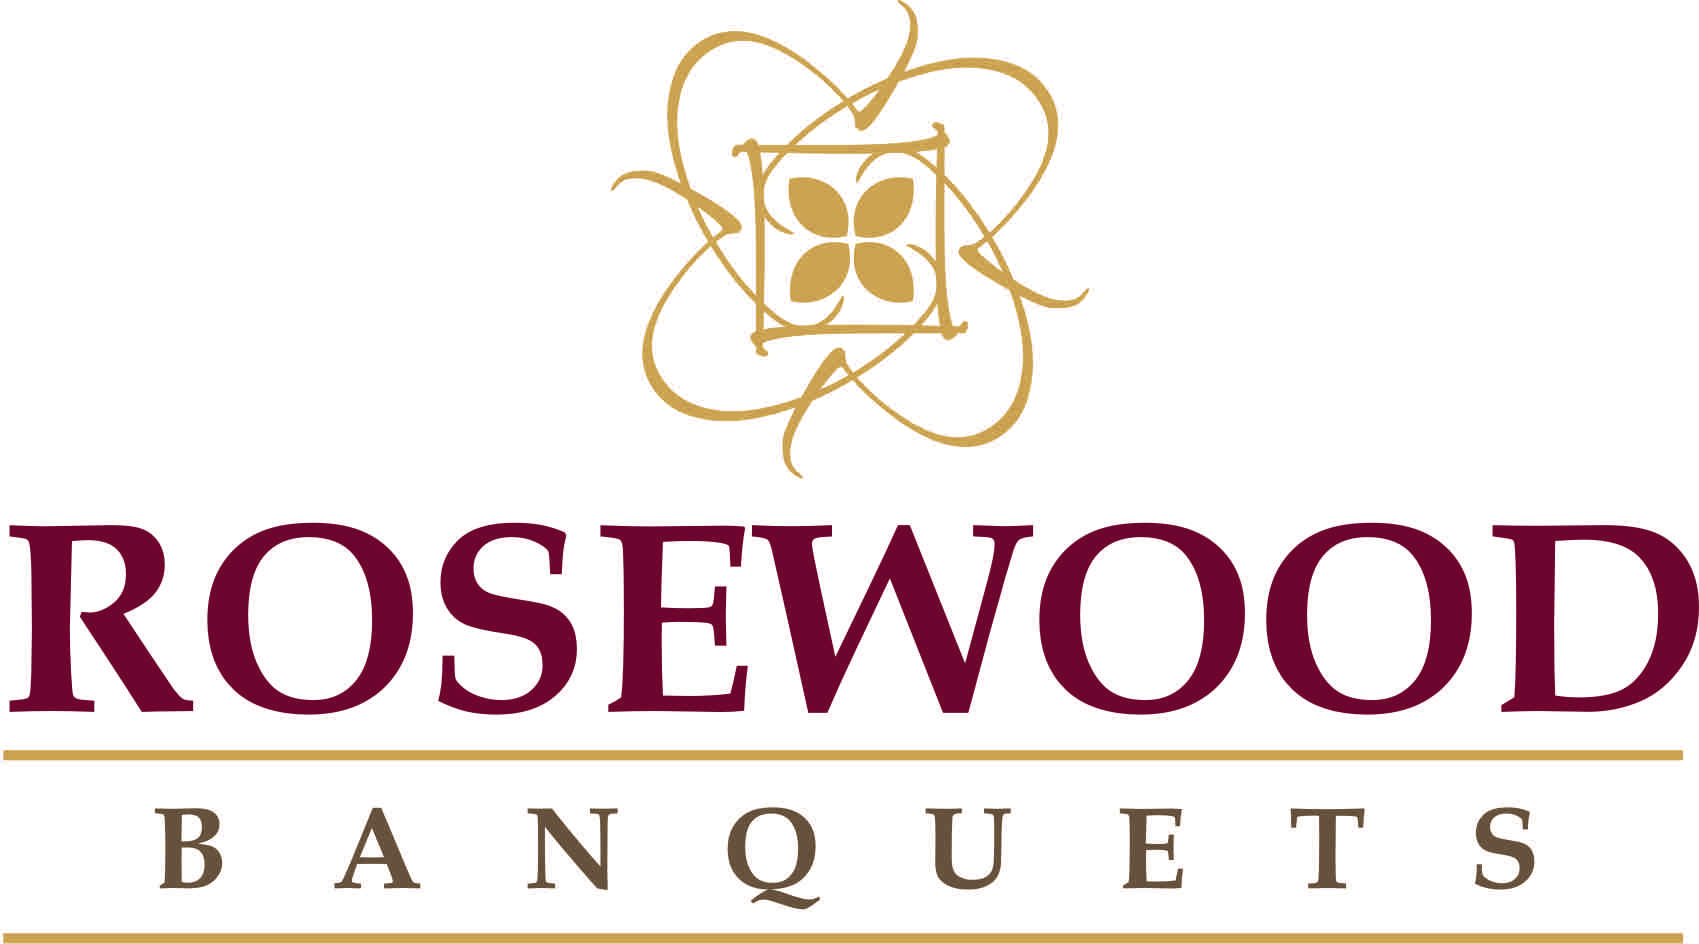 Rosewood Banquets|Photographer|Event Services